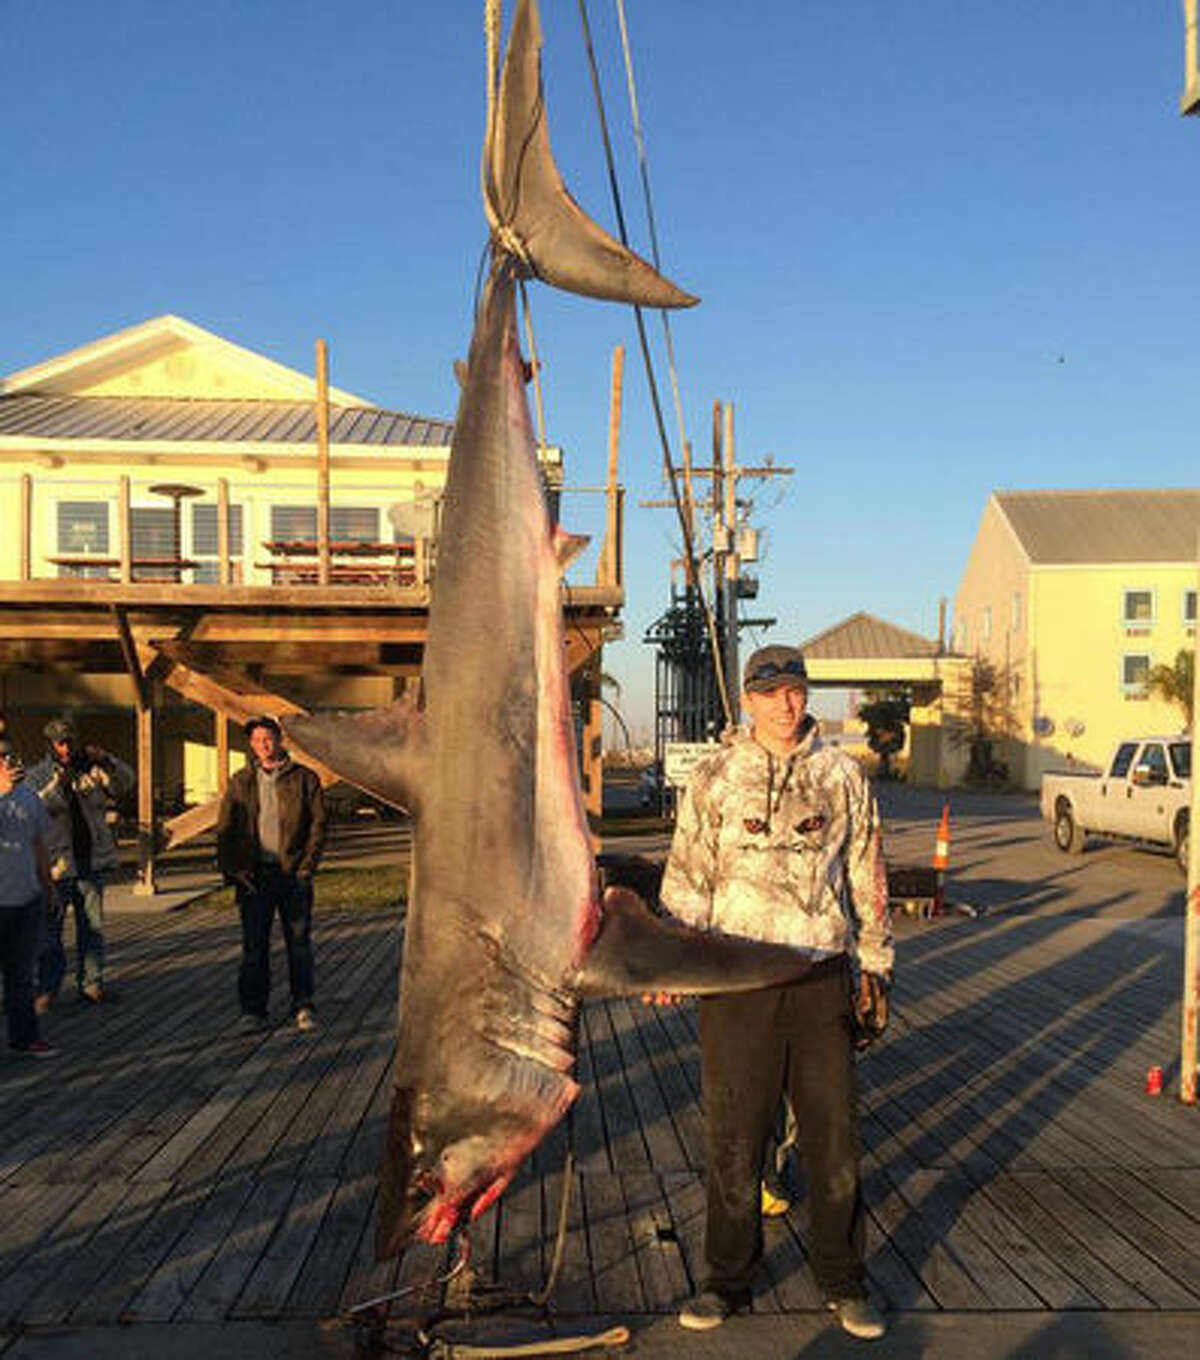 This 580 pound mako was caught on a fishing charter out of Venice, Louisiana. Visitors had come all the way from North Dakota to fish in the Gulf of Mexico.